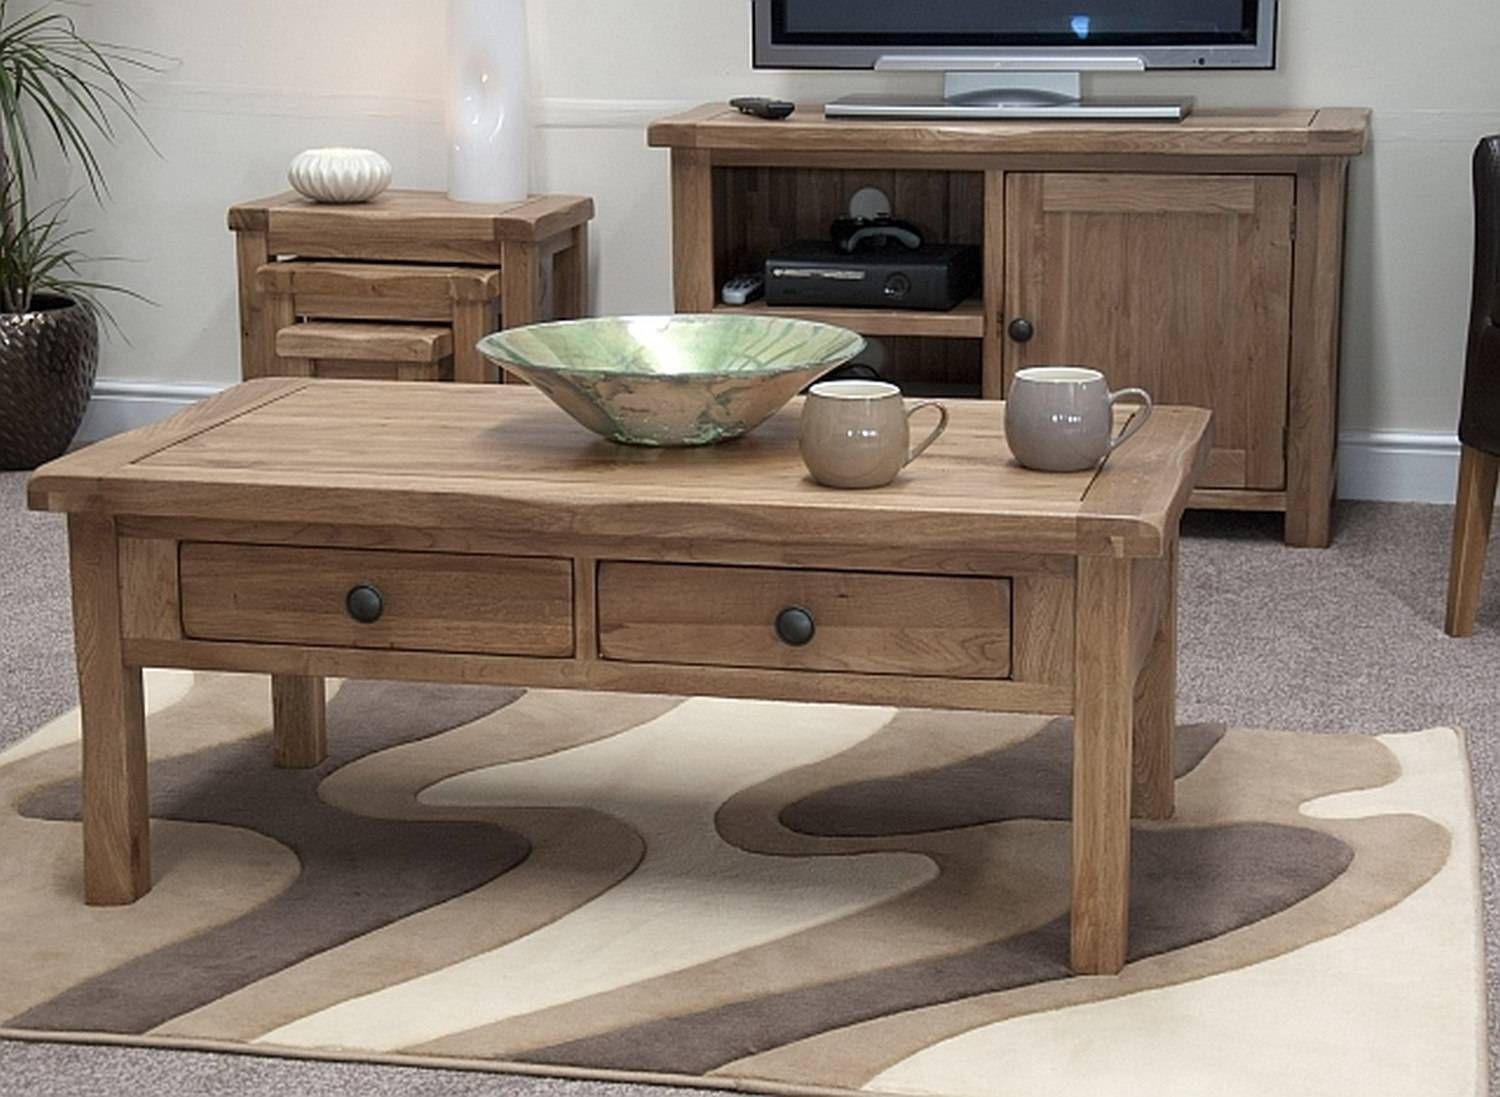 15 The Best Rustic Oak Coffee Table With Drawers